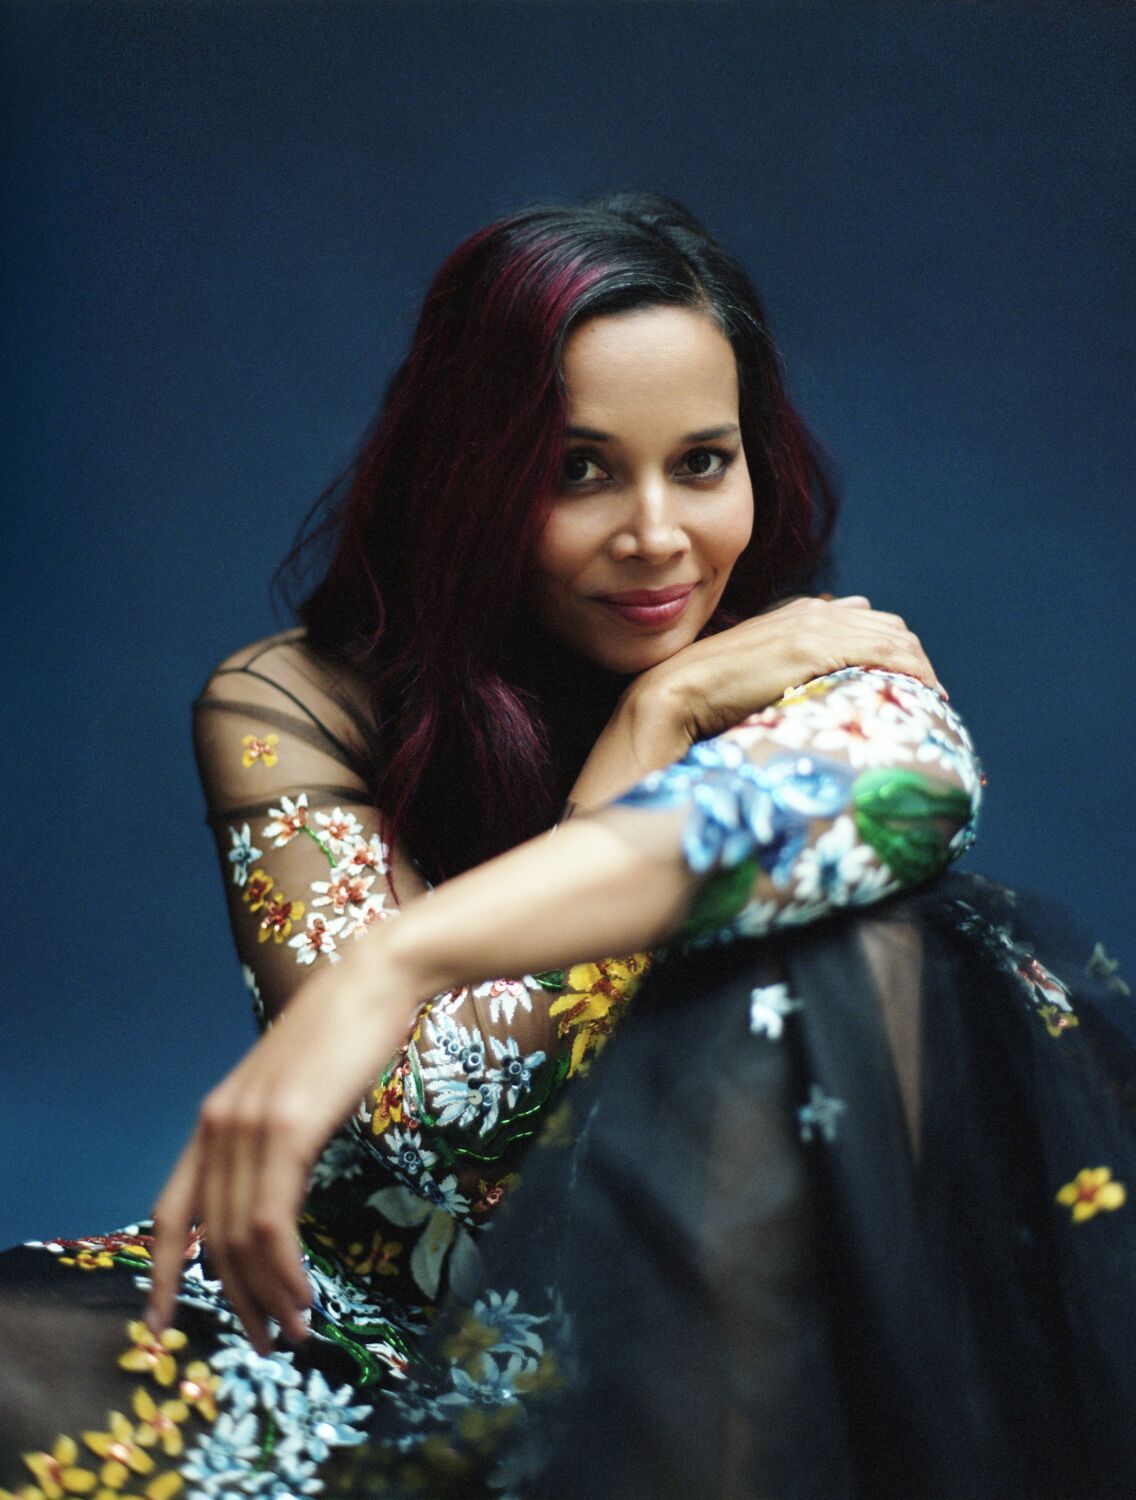 Ojai music director Rhiannon Giddens knows the 2023 festival program sounds risky — that’s the point